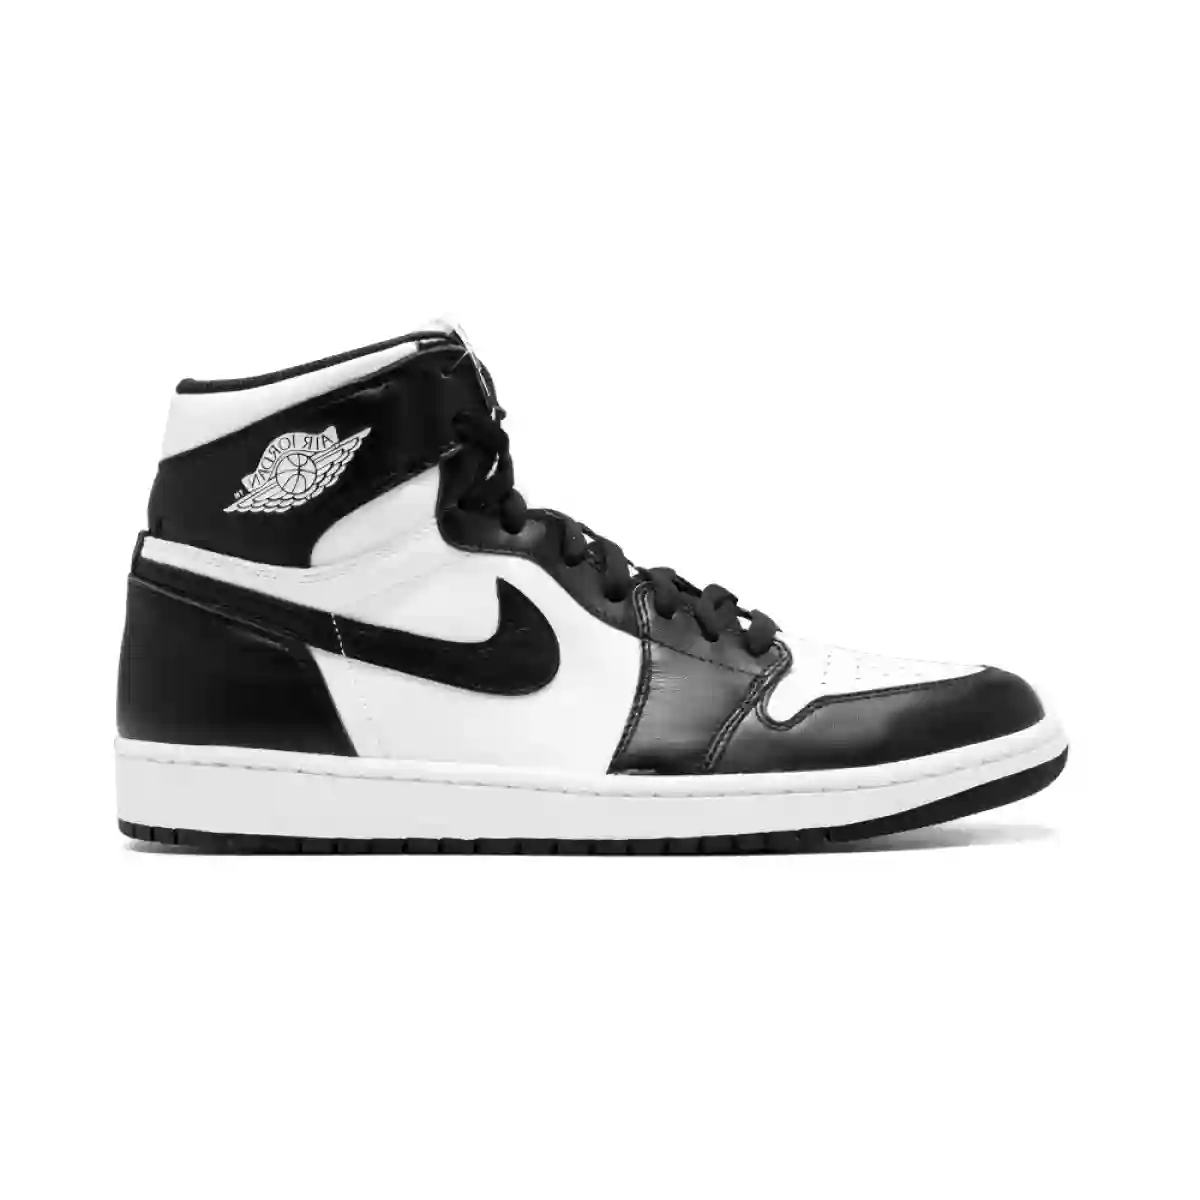 Jordan 1 Retro High Black And White | Buy Online At The Best Price In Accra